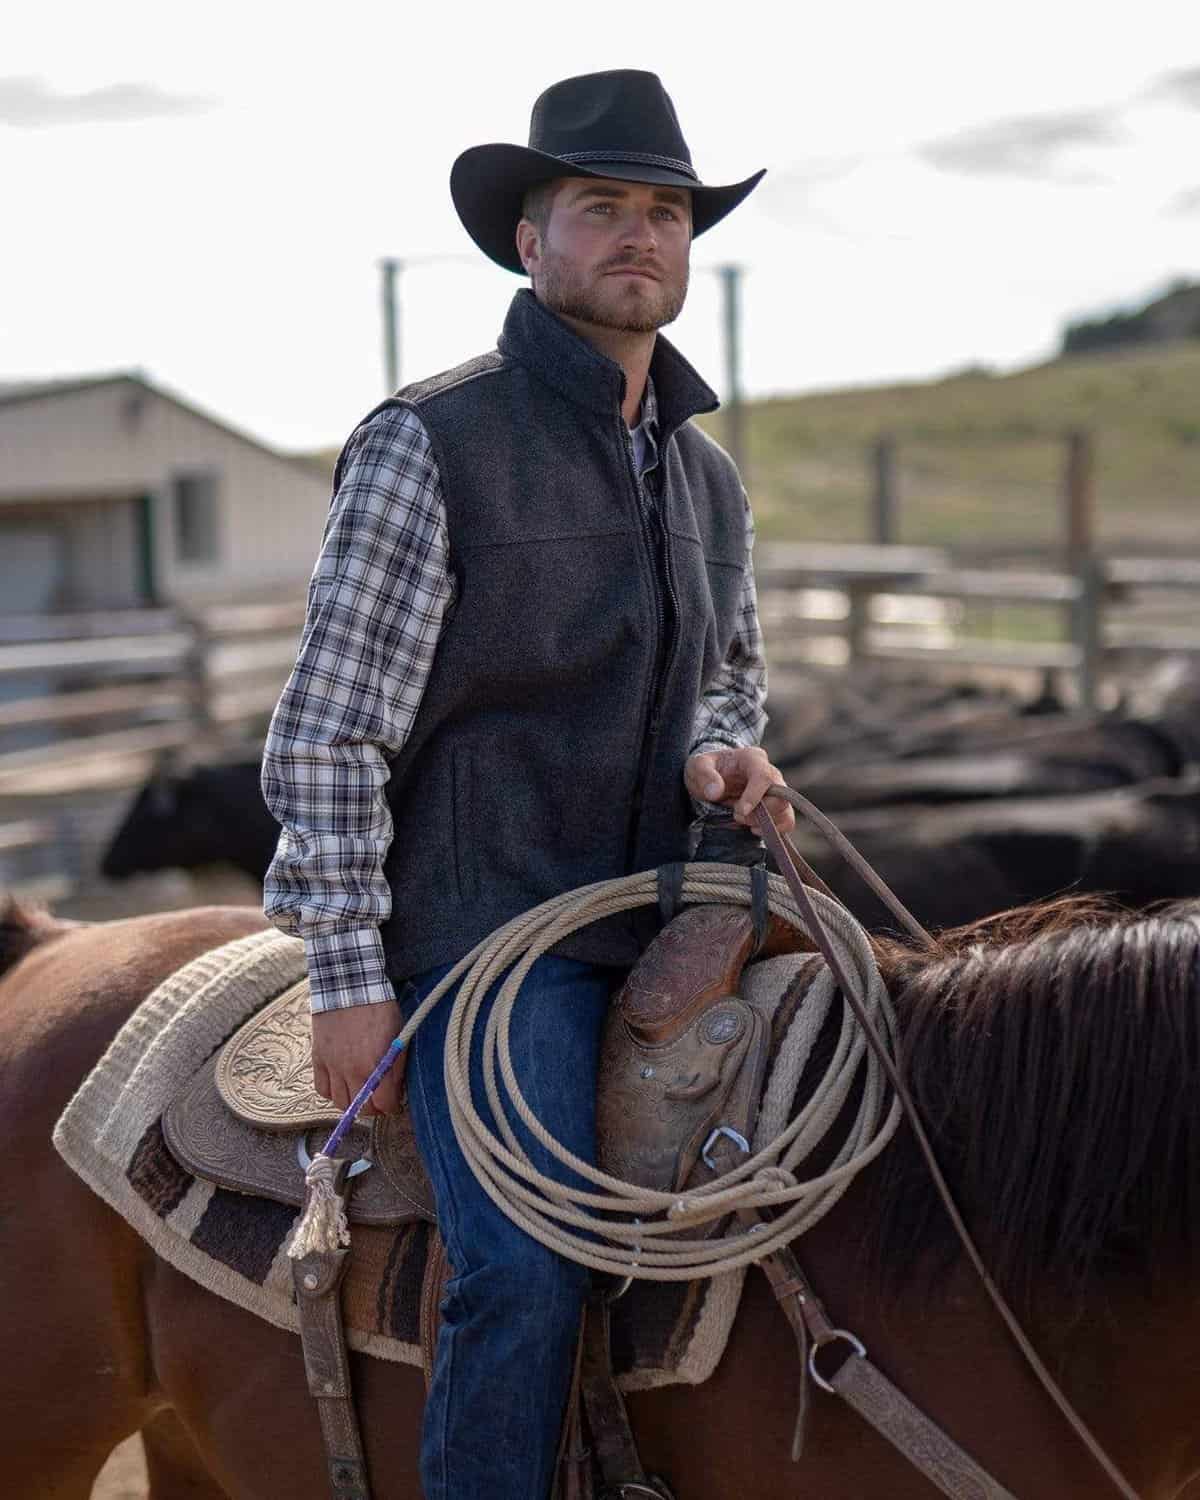 The 10 Best Cowboy Hat Brands You Should Know - Hat Realm